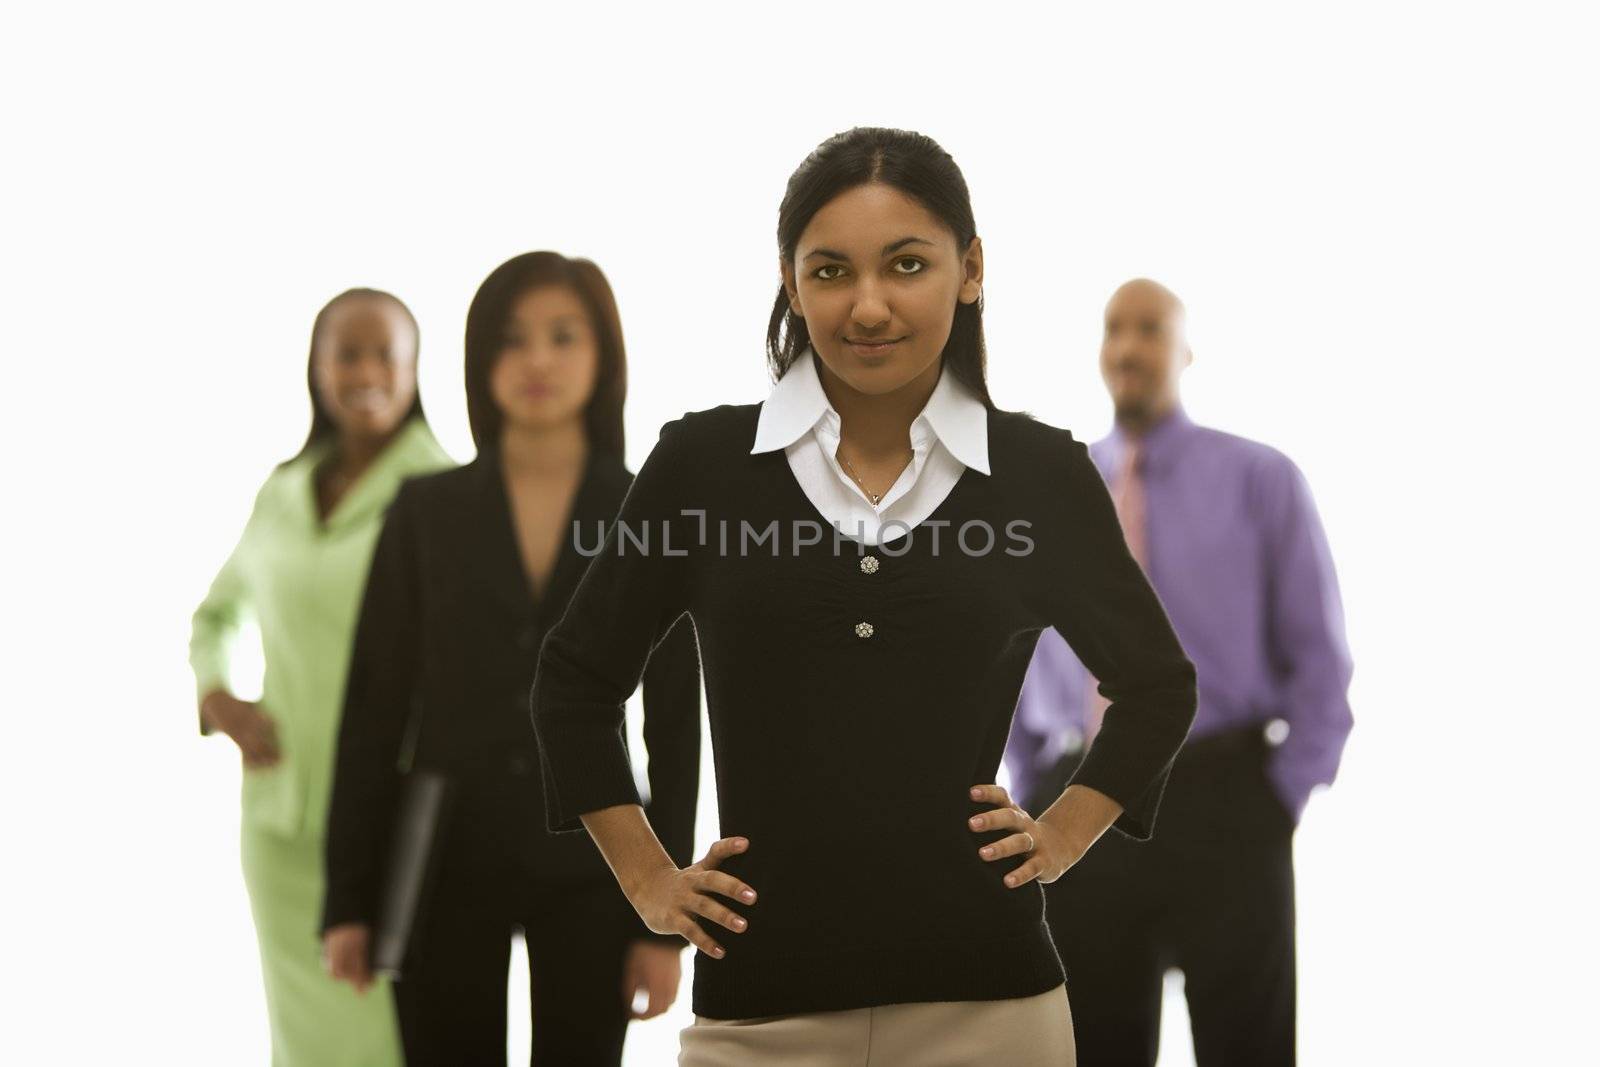 Portrait of Indian businesswoman smiling with hands on hips with others in background.